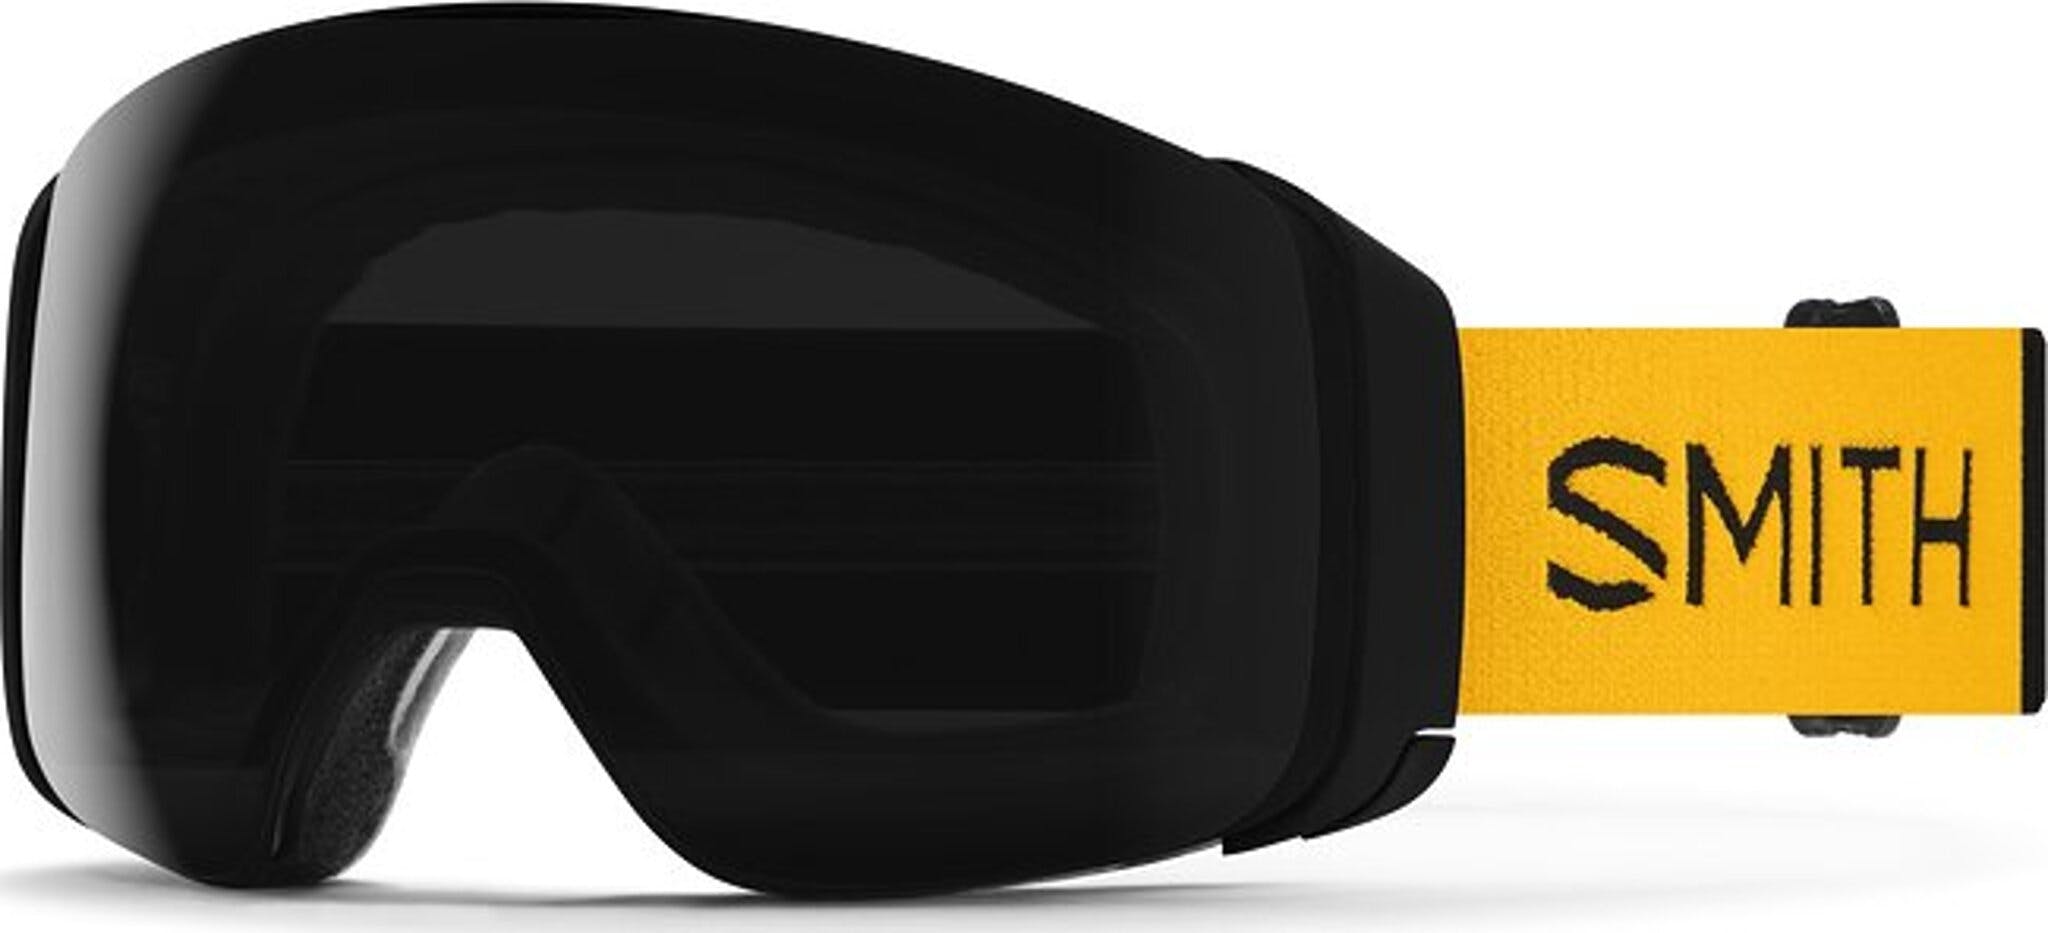 Product image for 4D Mag Snow Goggles - Unisex